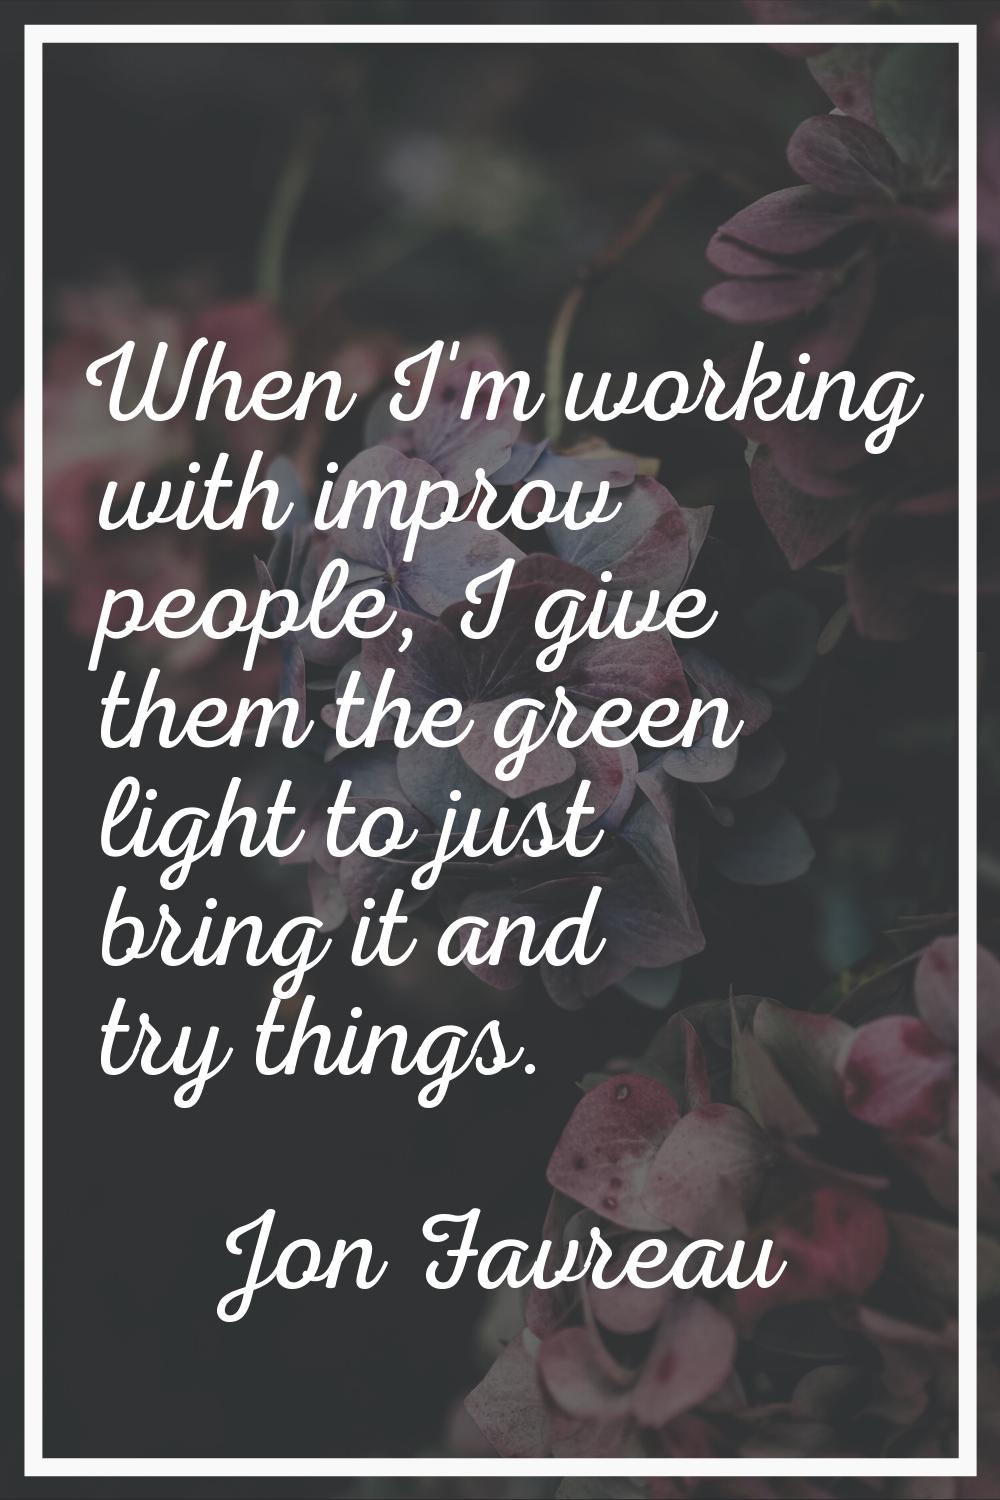 When I'm working with improv people, I give them the green light to just bring it and try things.